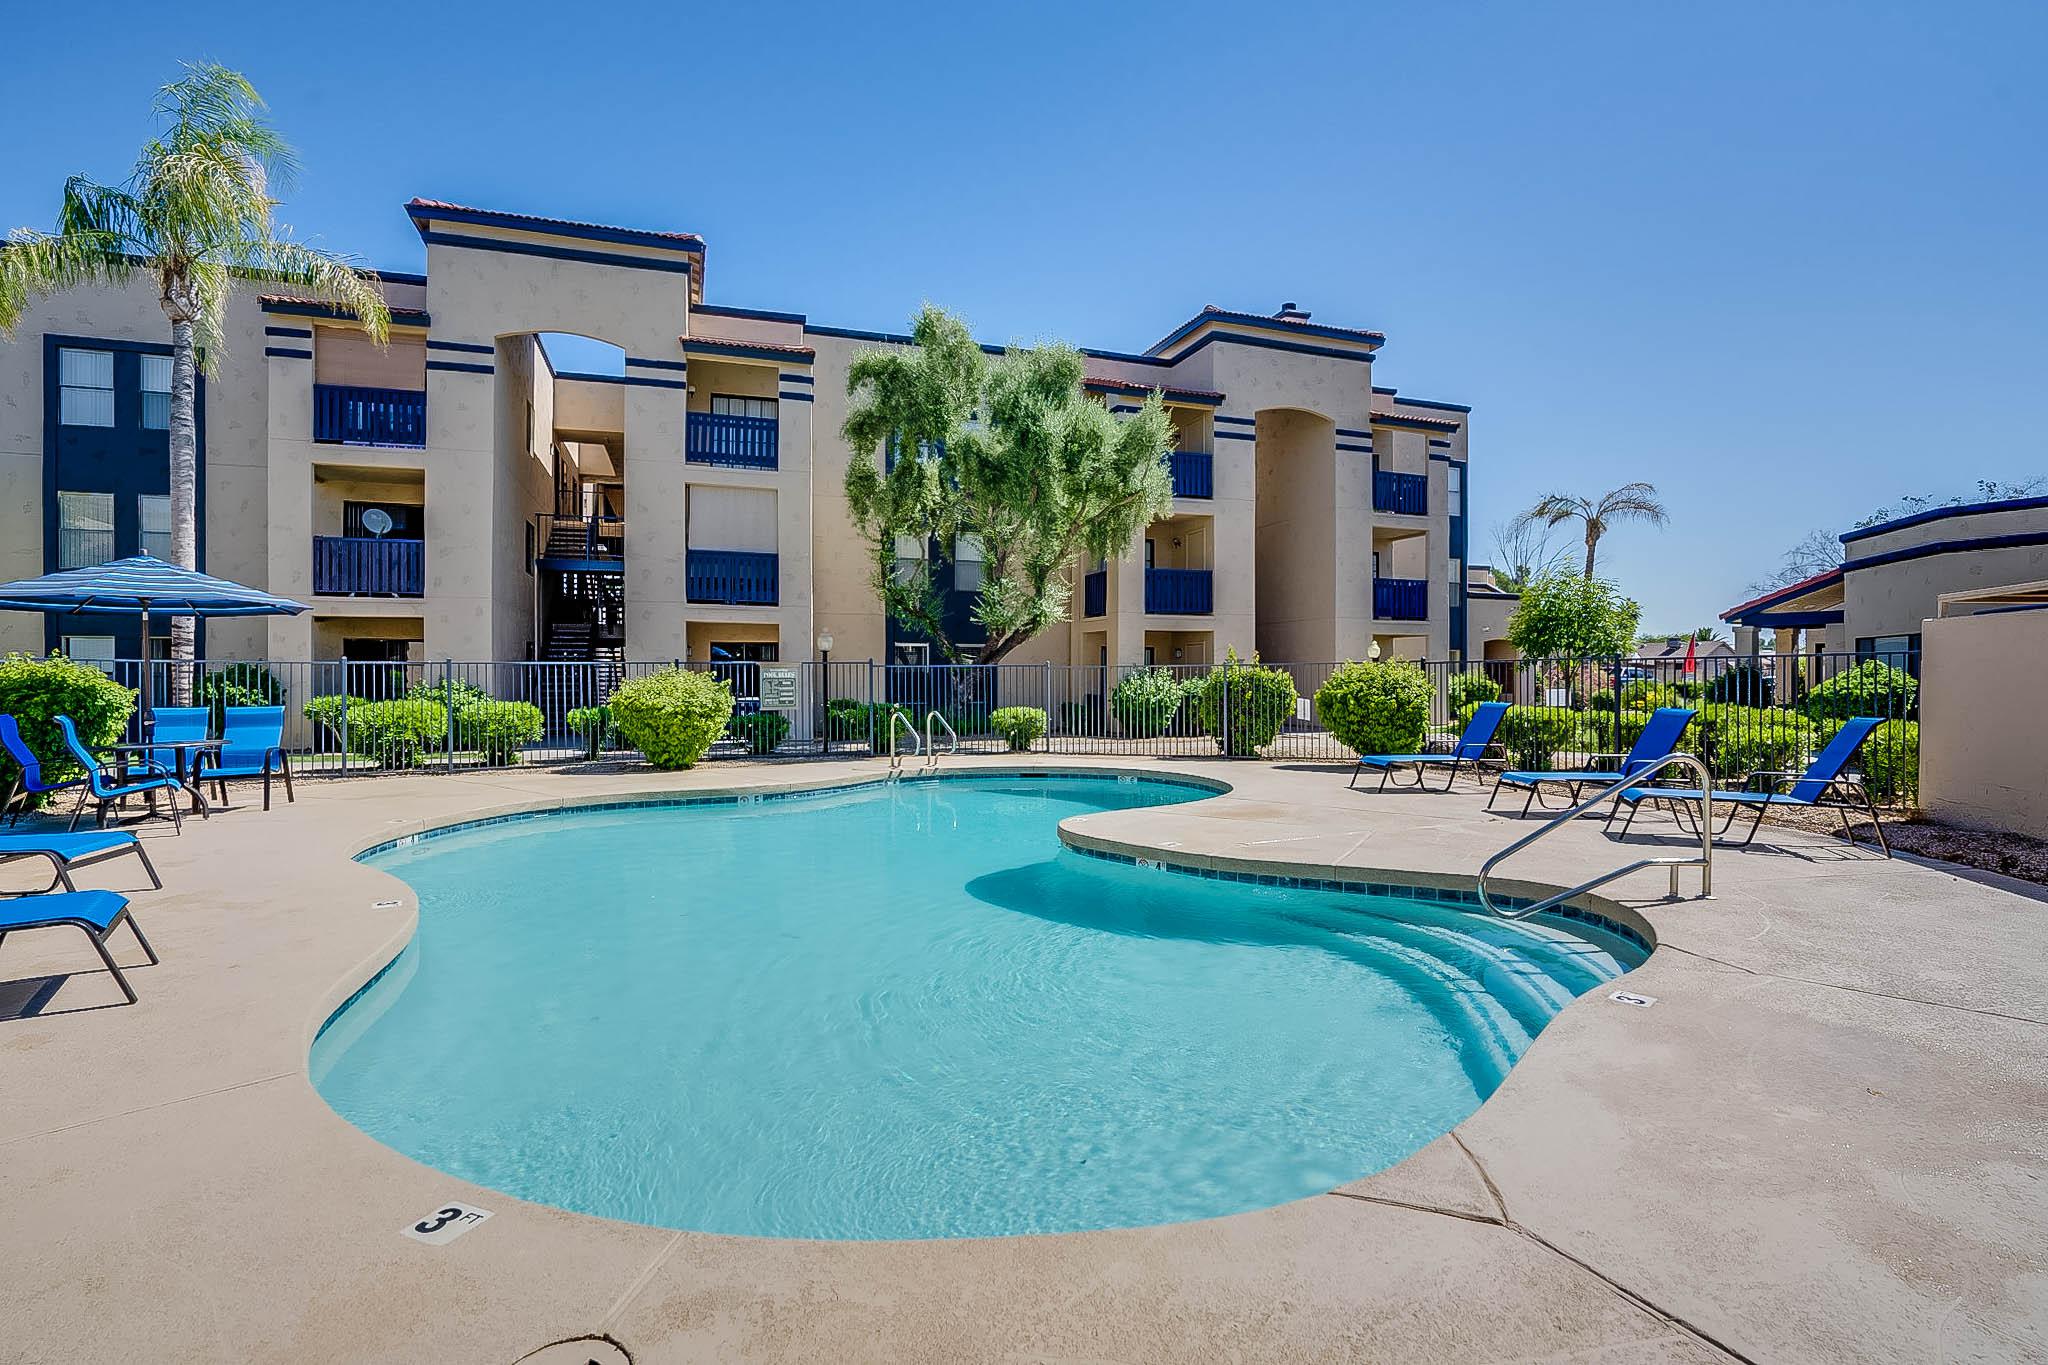 Phoenix AZ Apartments - Monaco31 - Pool With Clear Water, Lounge Chairs, and Metal Fence